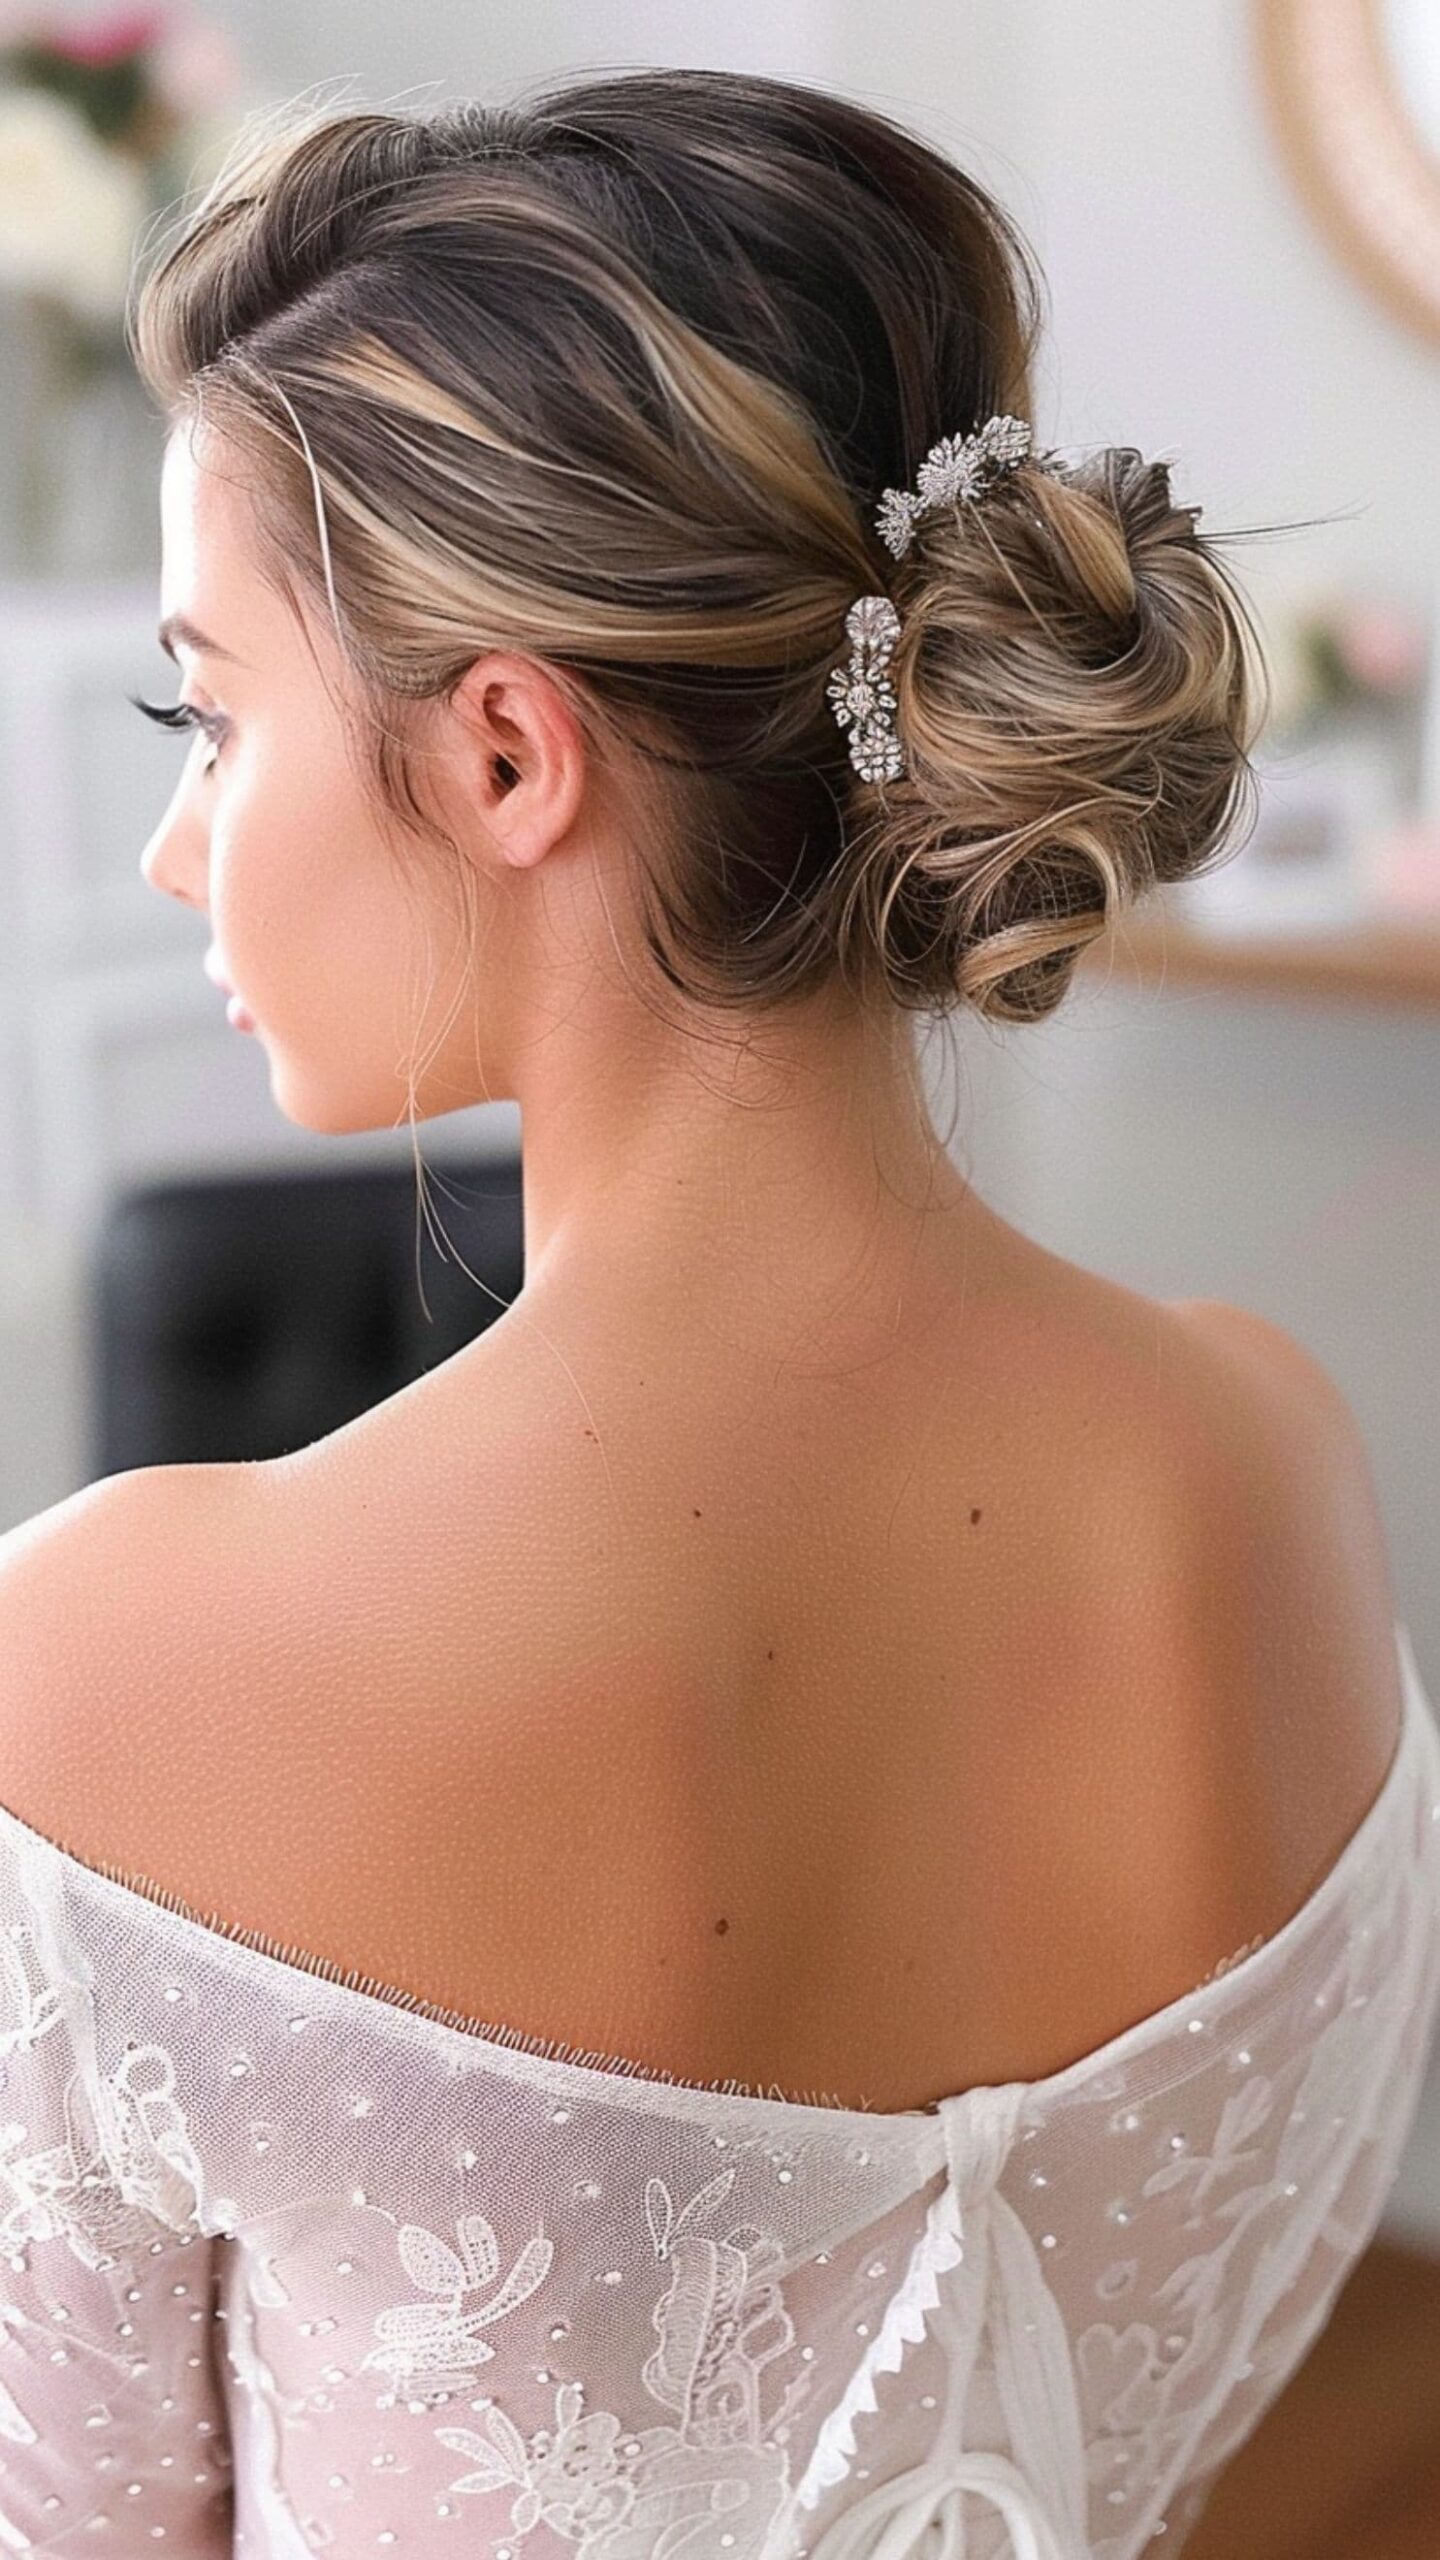 A woman modelling a textured updo.